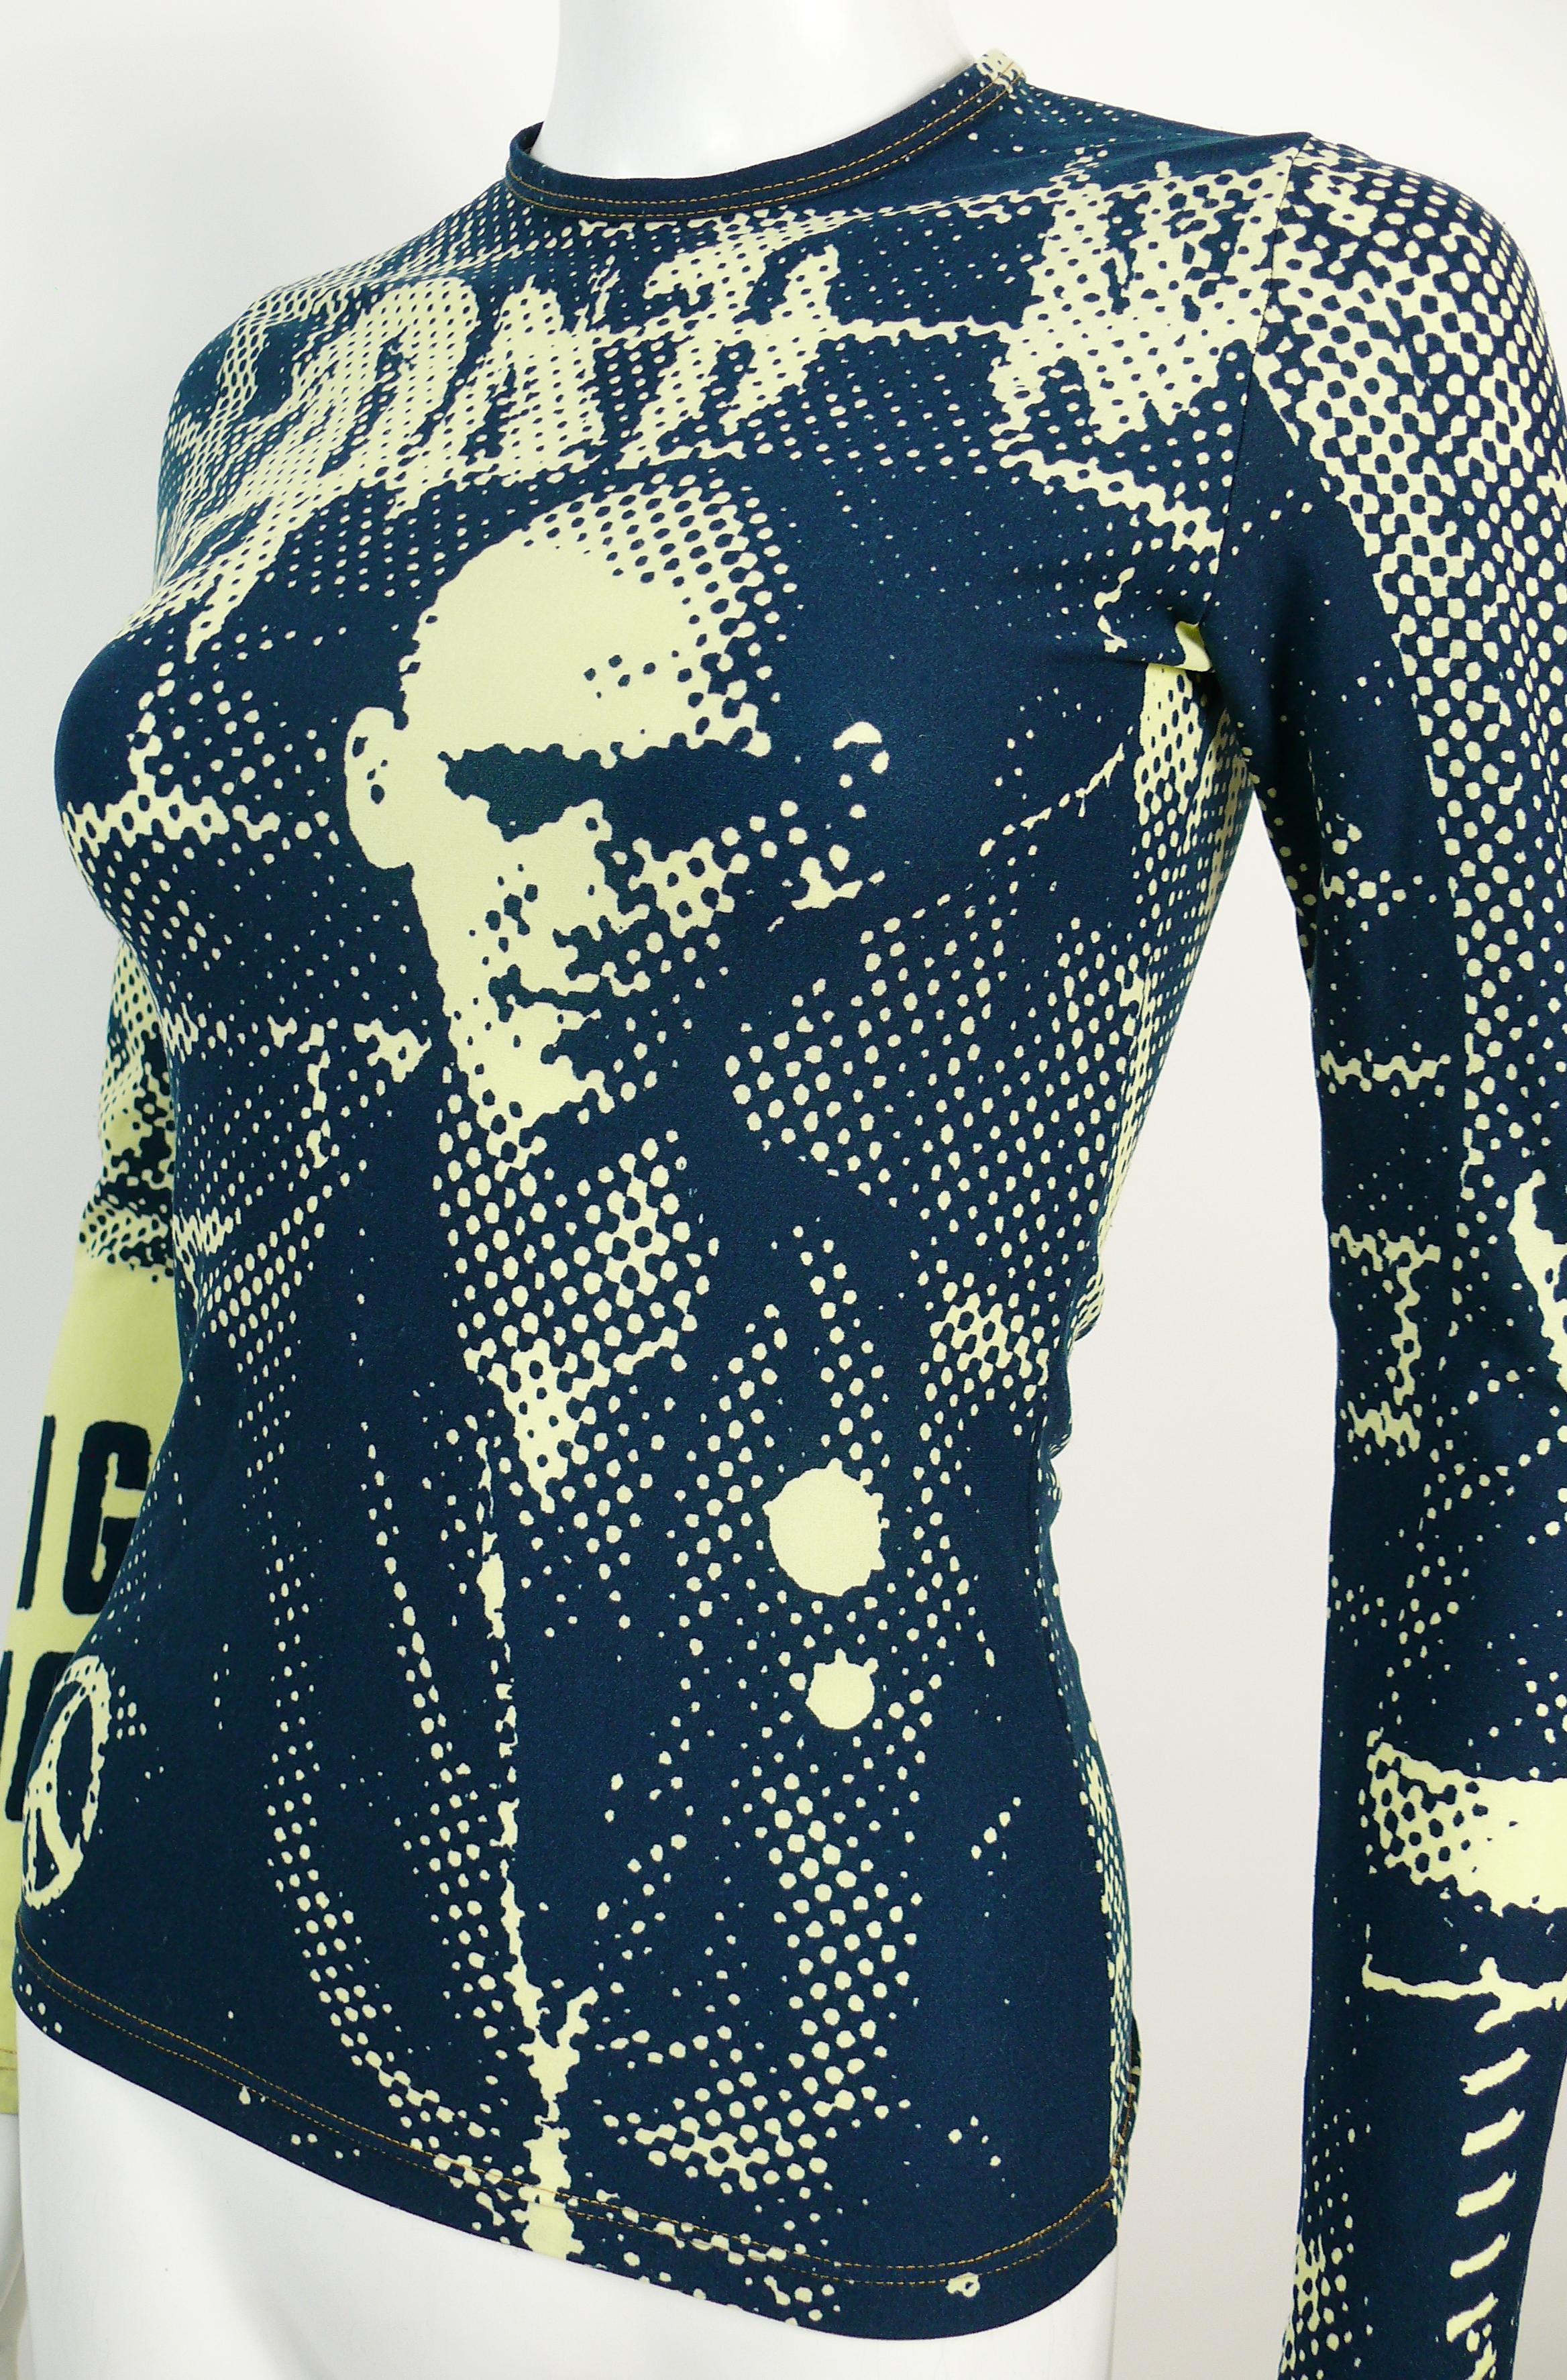 Black Jean Paul Gaultier Vintage Fight Racism Collection Long Sleeve Shirt